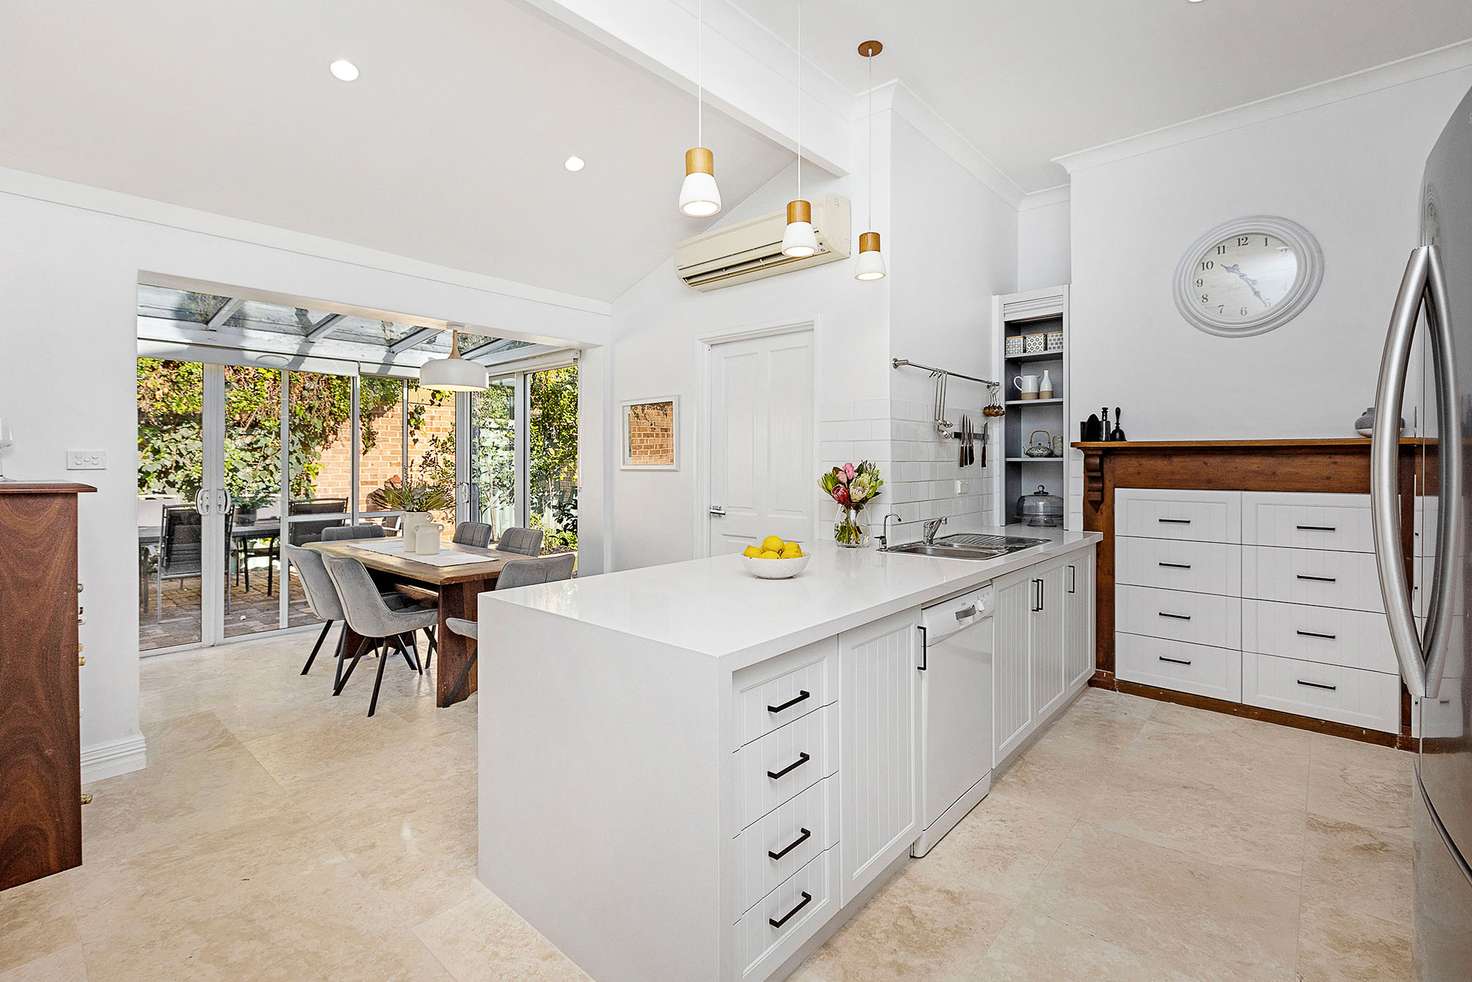 Main view of Homely house listing, 33 Douglas Avenue, South Perth WA 6151